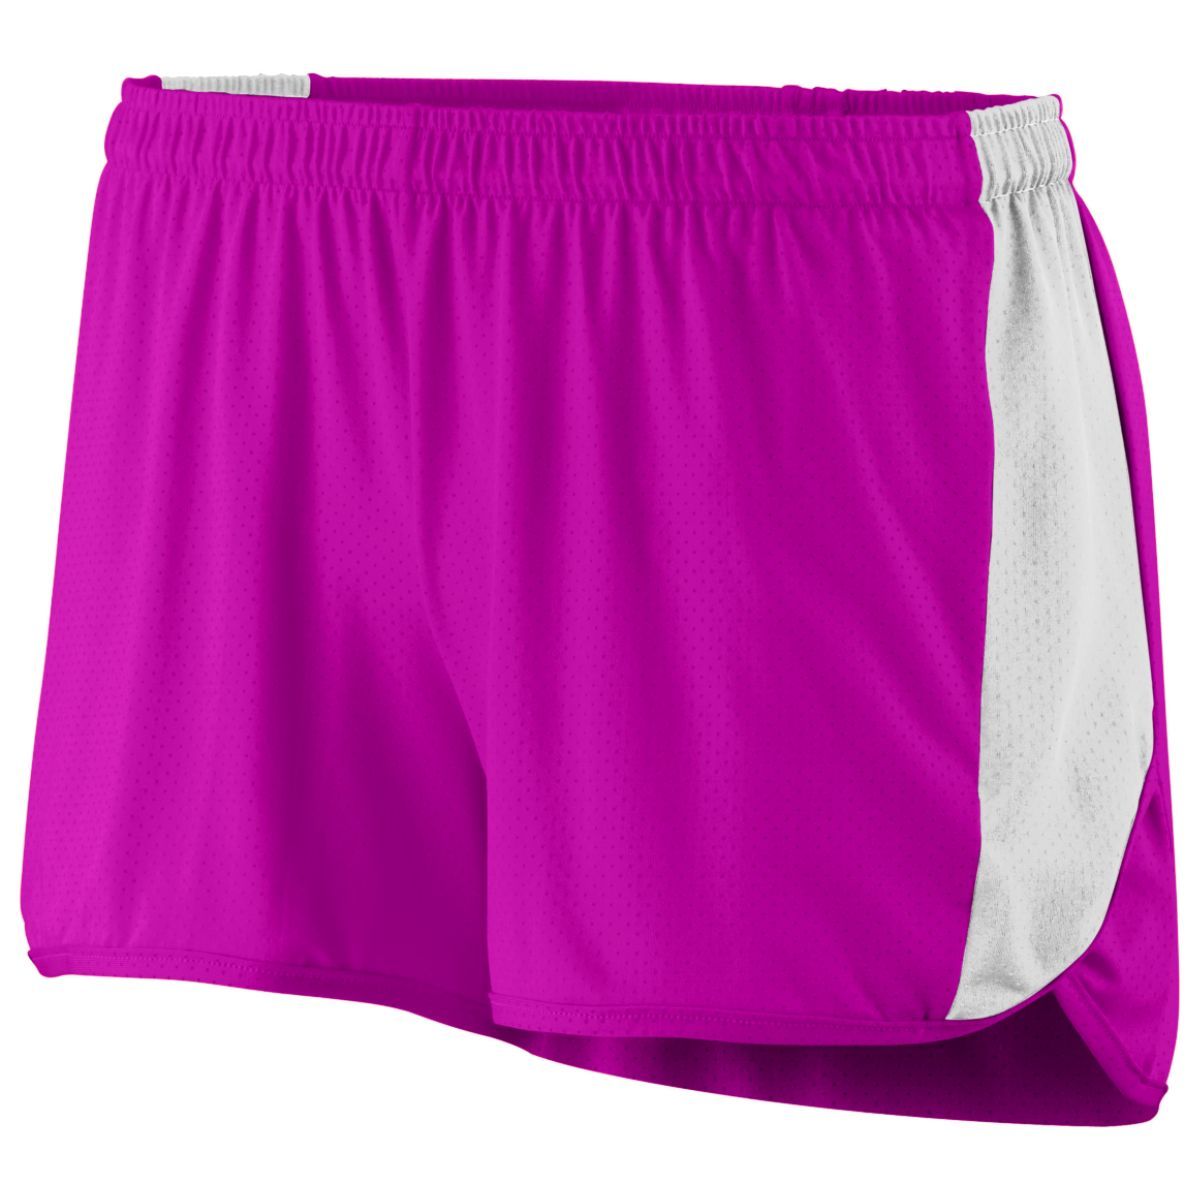 Augusta Sportswear Ladies Sprint Shorts in Power Pink/White  -Part of the Ladies, Ladies-Shorts, Augusta-Products, Track-Field product lines at KanaleyCreations.com